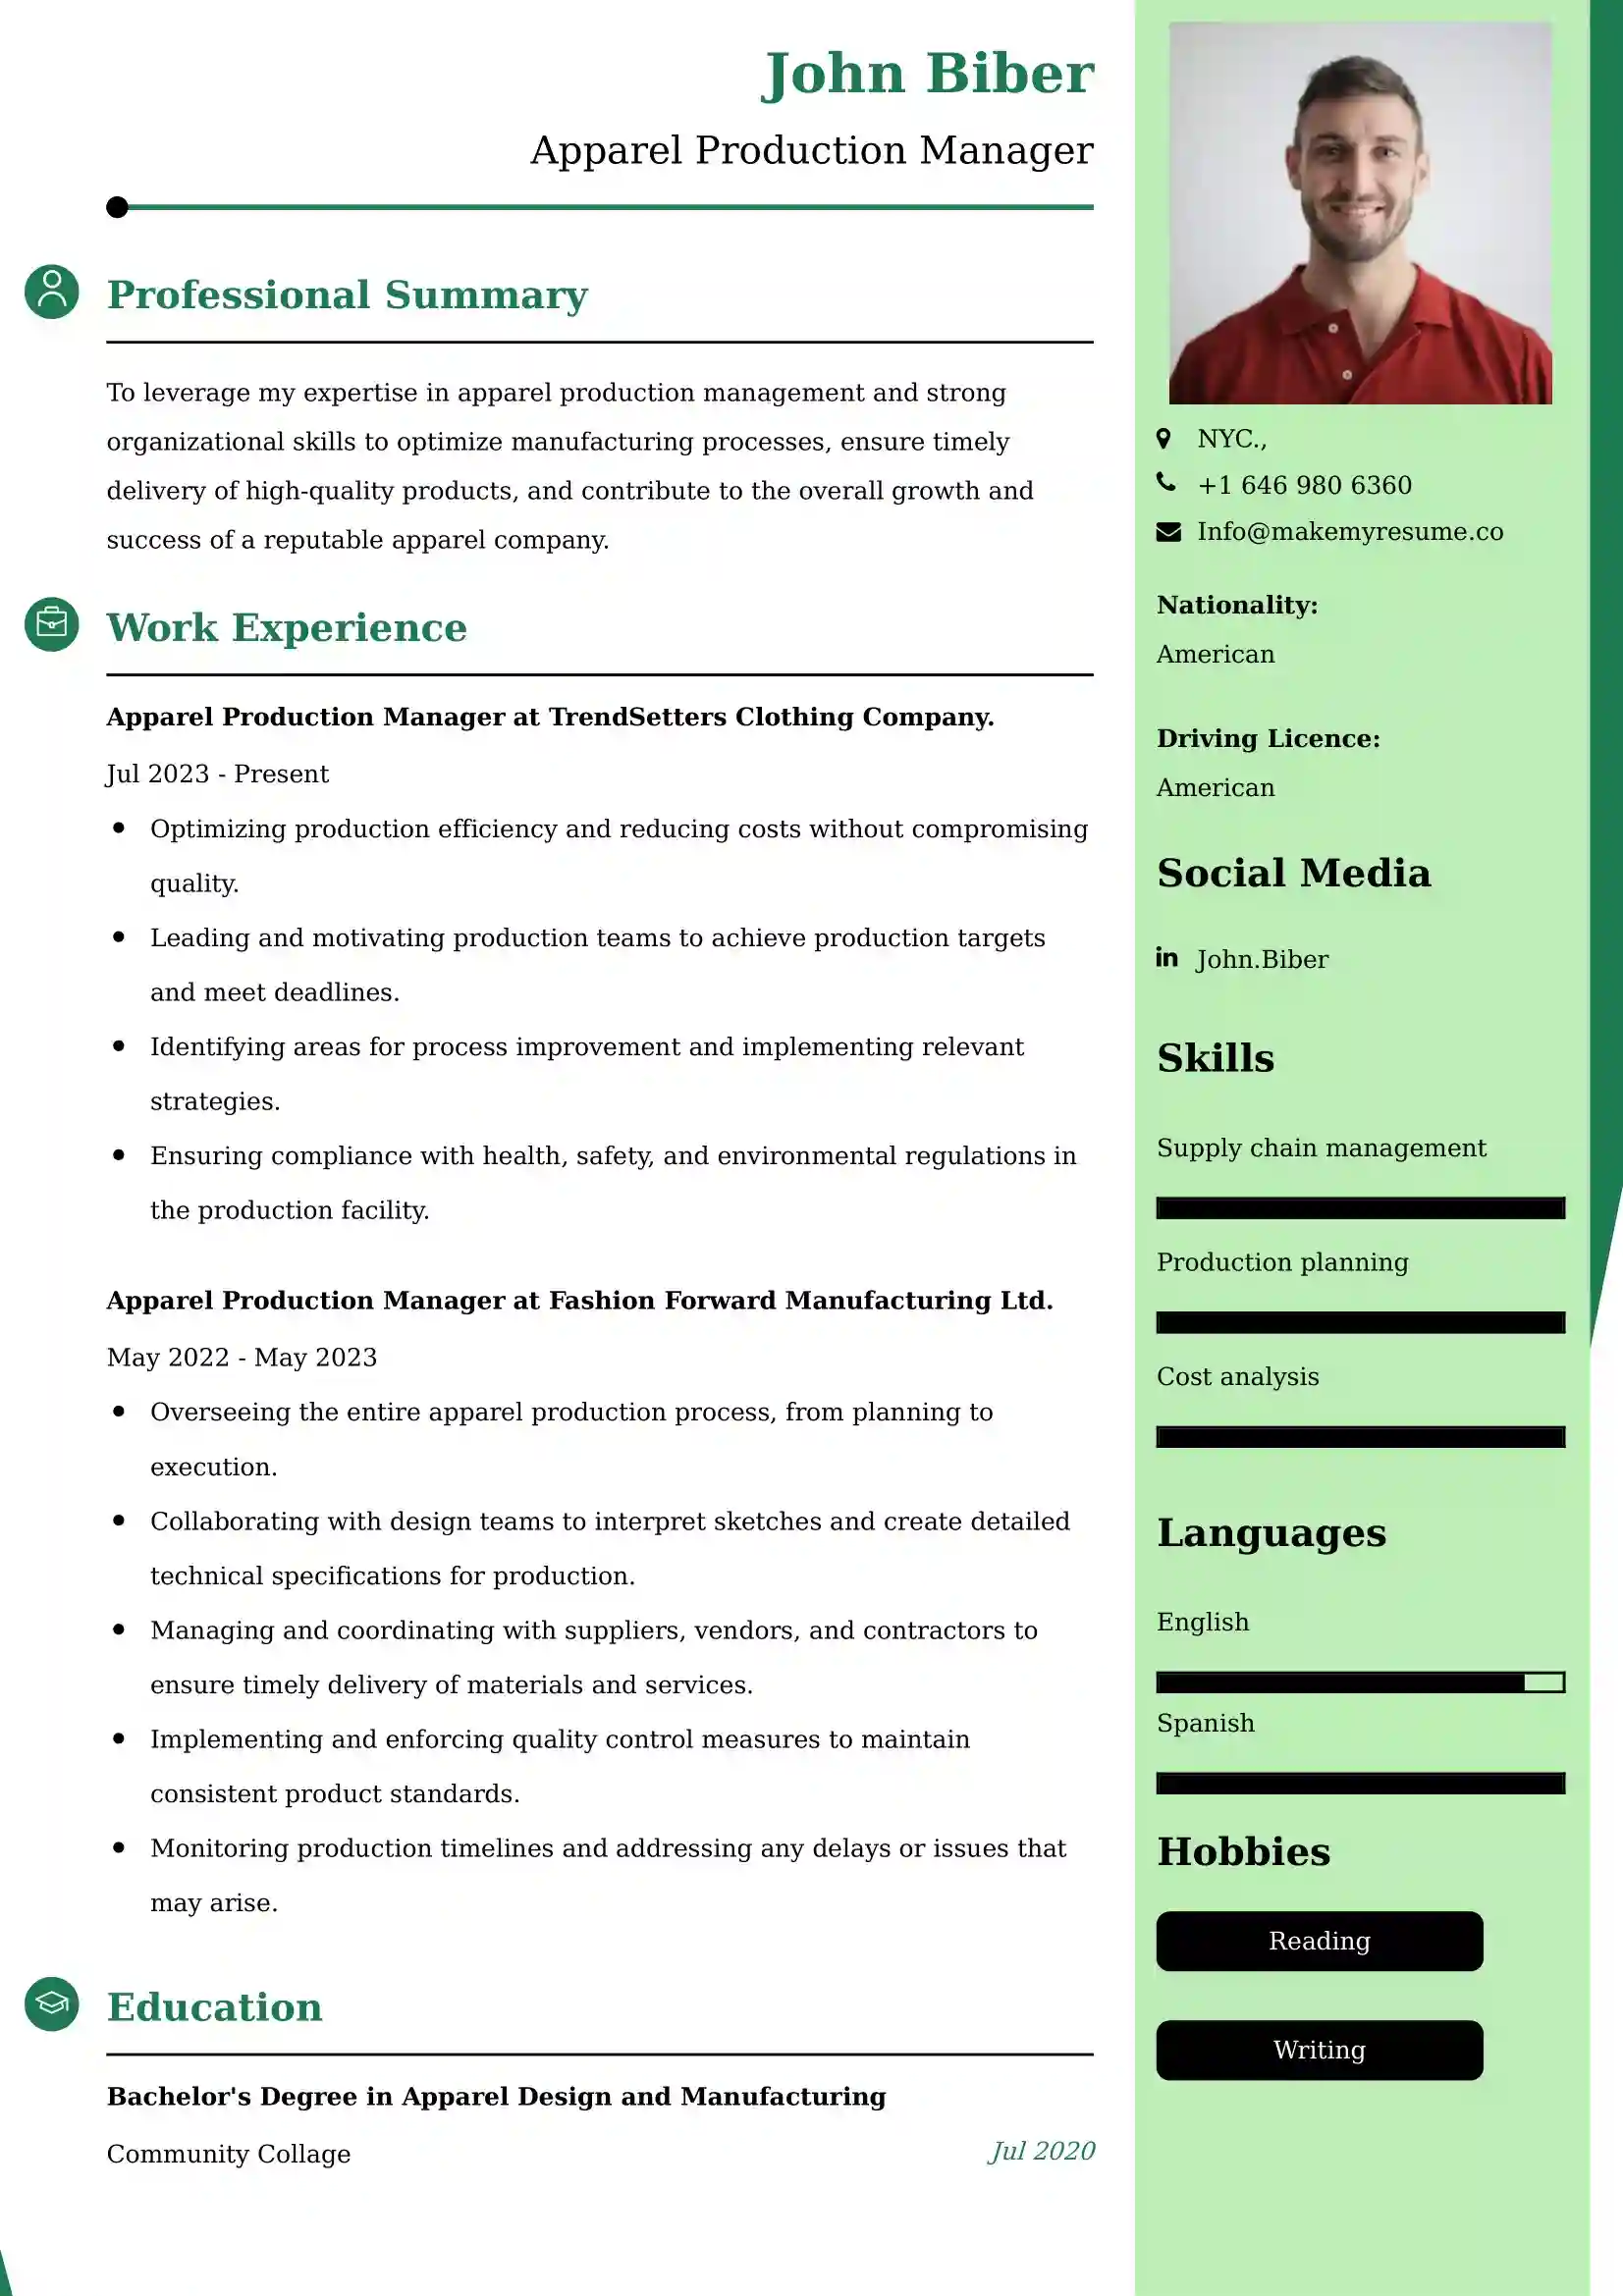 Apparel Production Manager Resume Examples - UK Format, Latest Template.